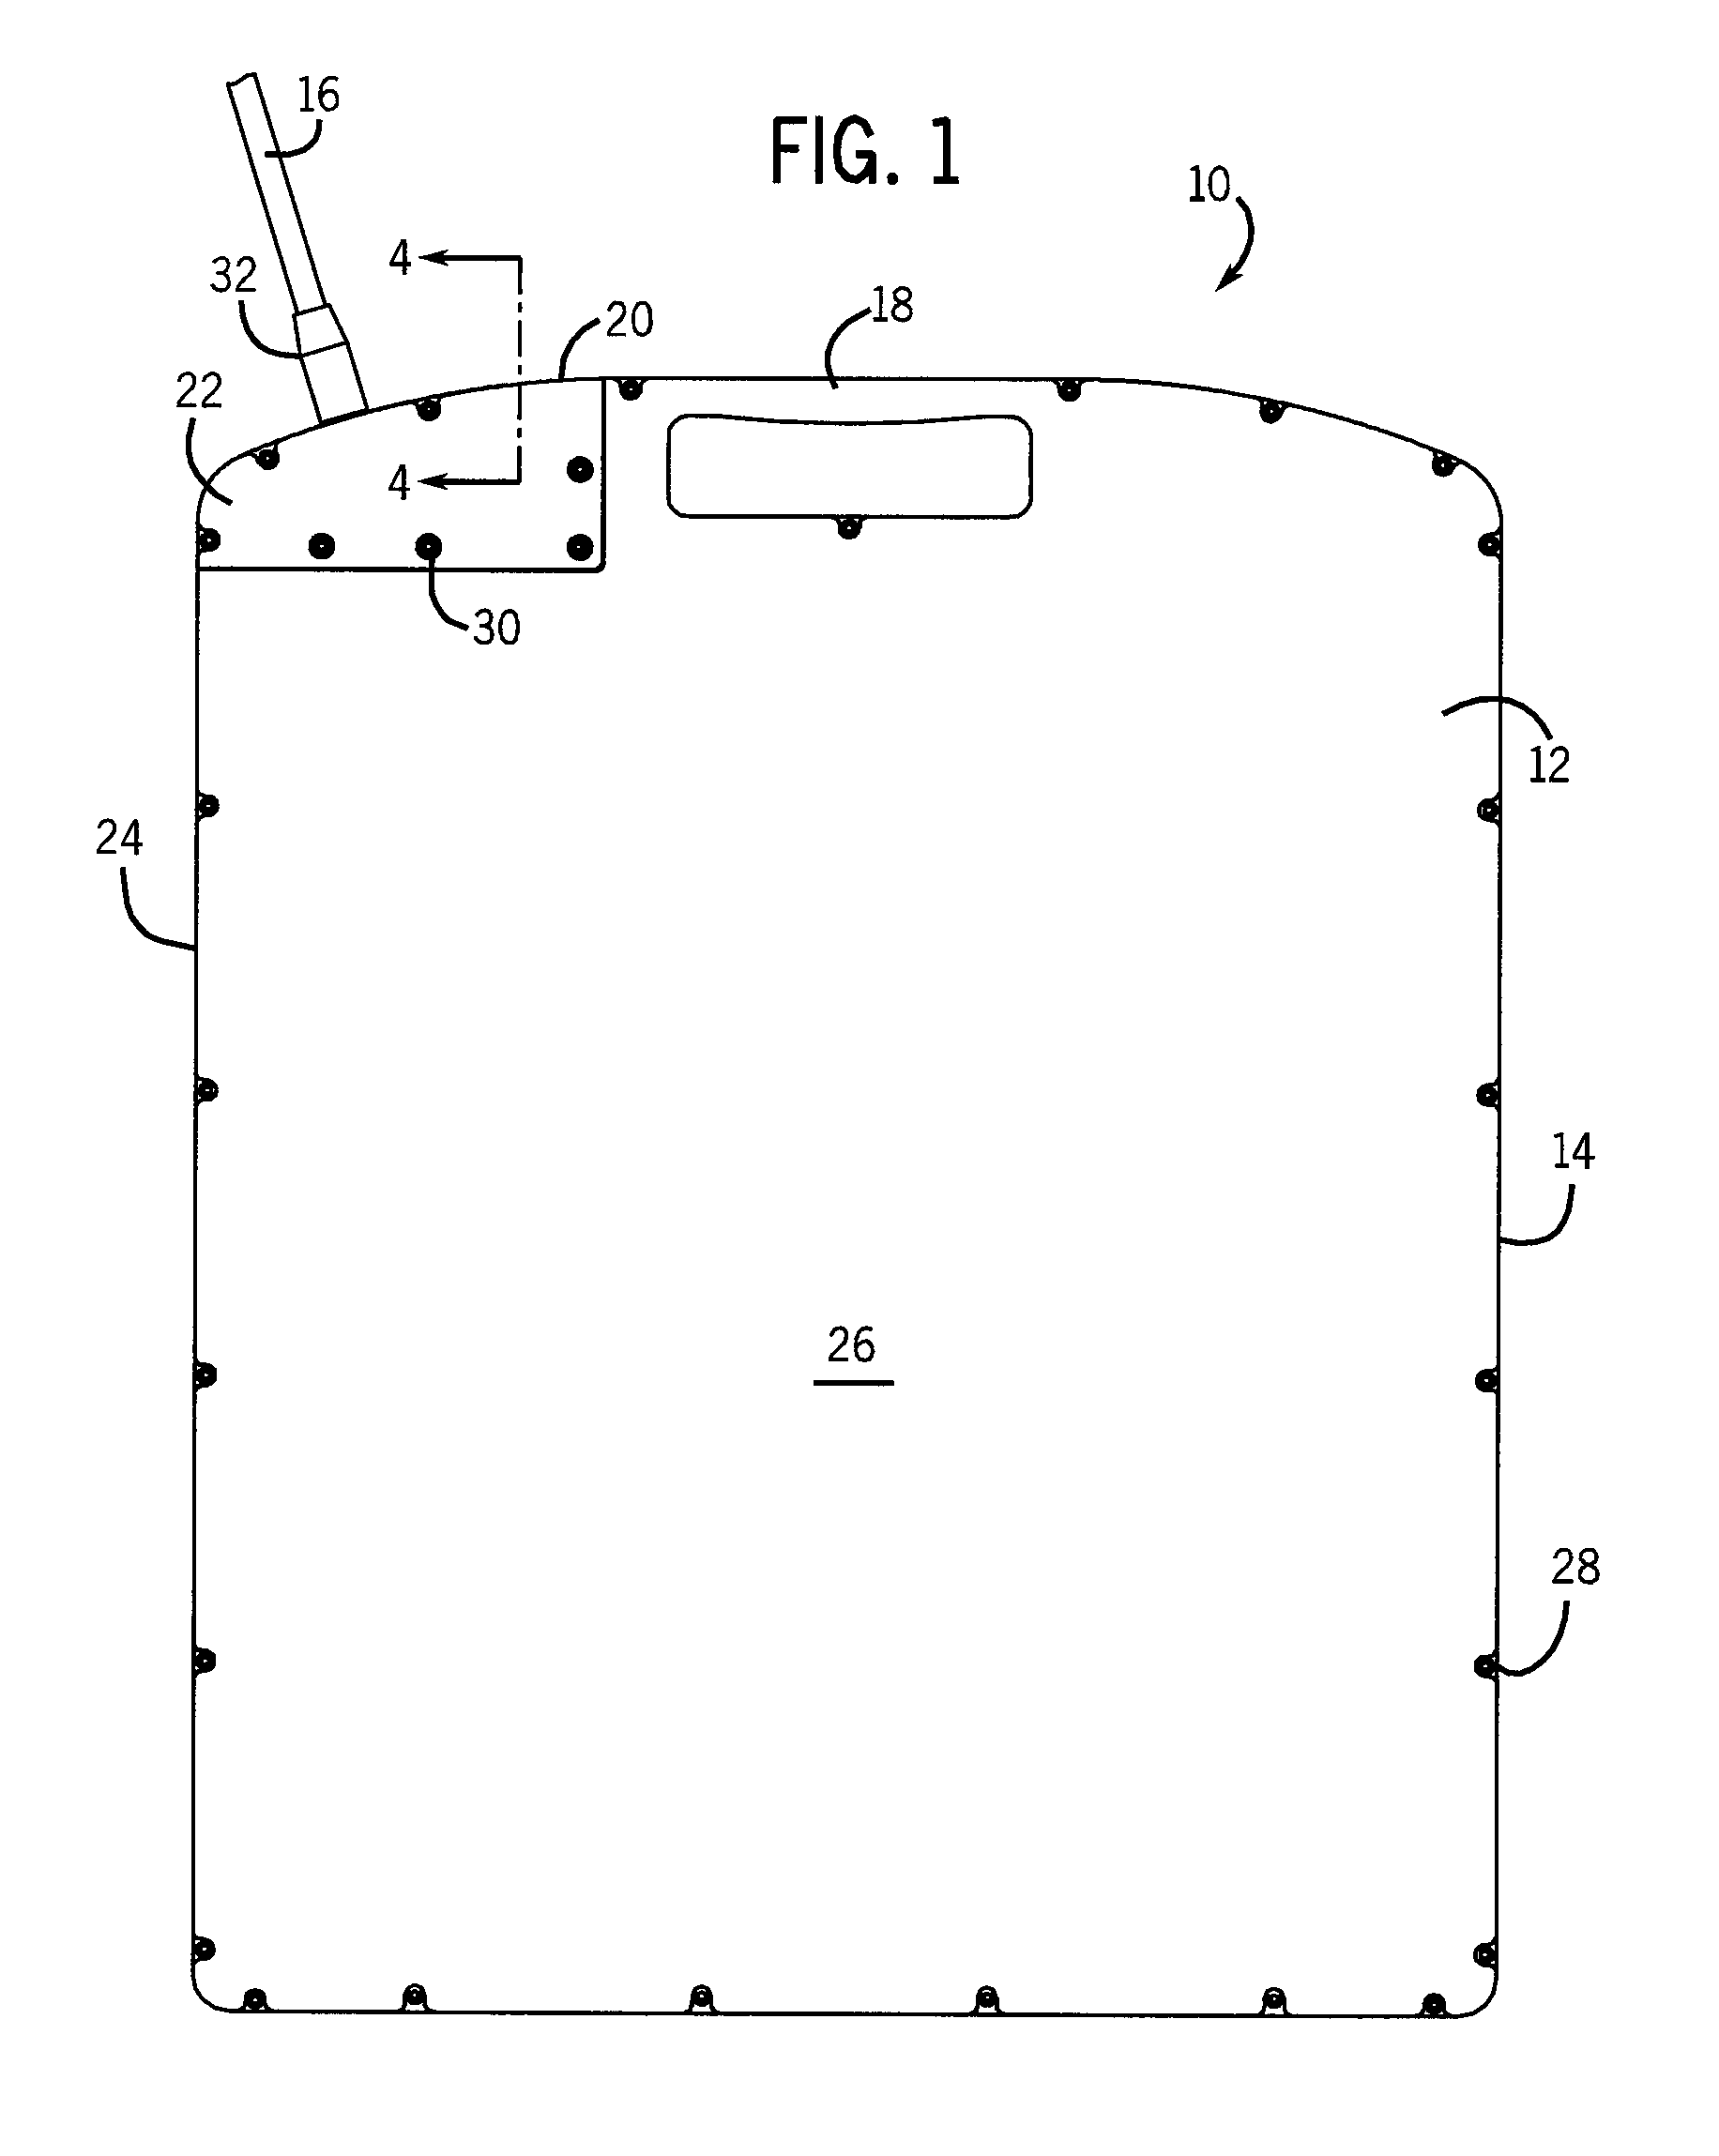 Digital radiography detector assembly with access opening